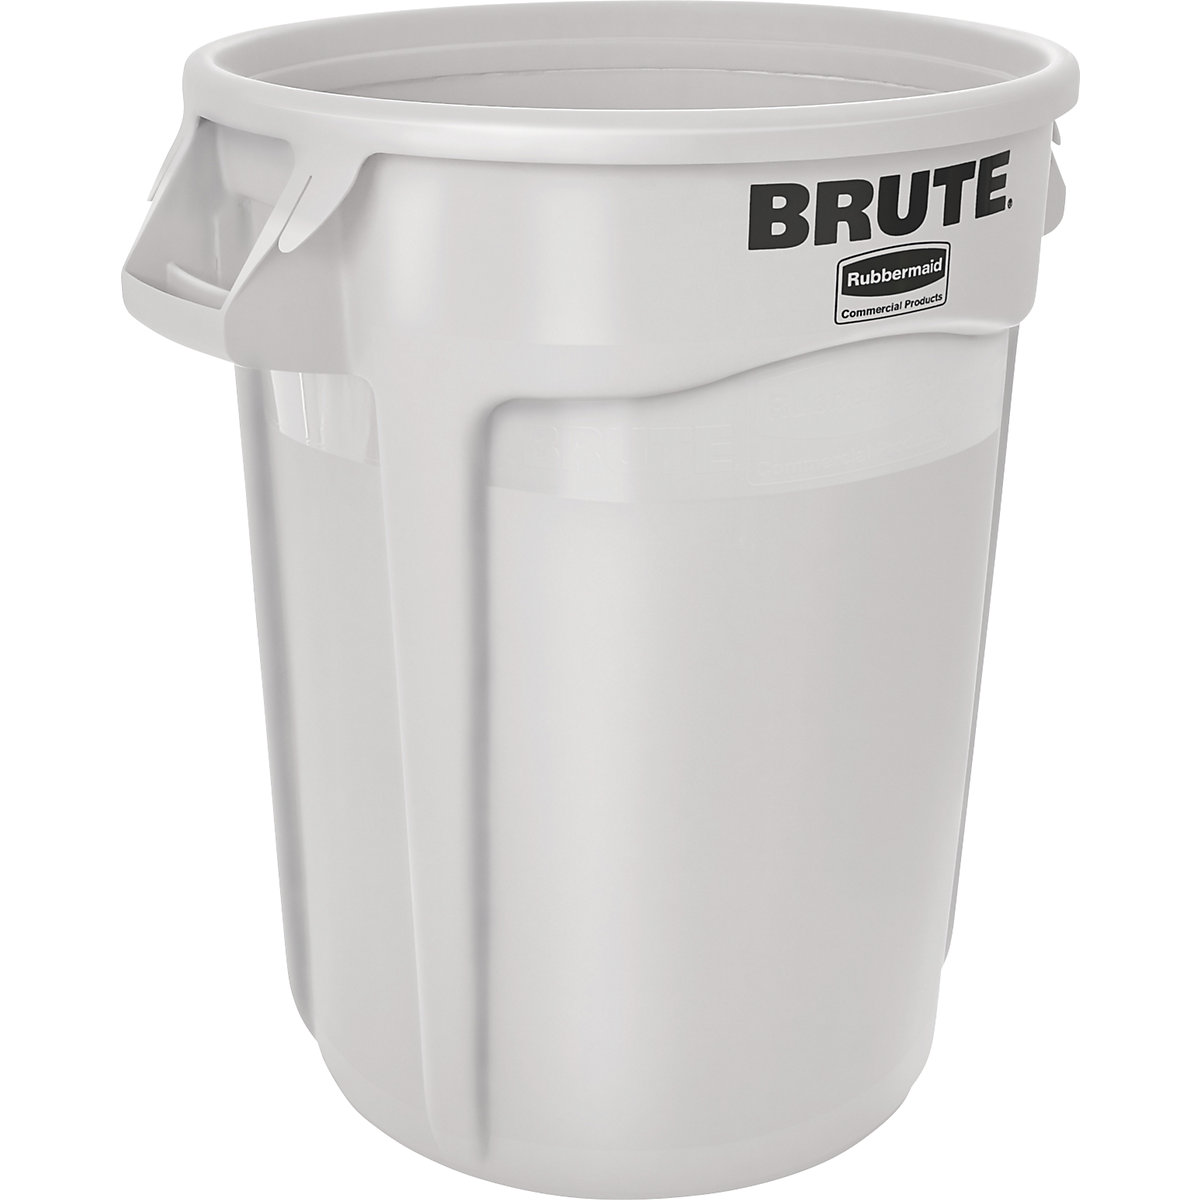 BRUTE® universal container, round – Rubbermaid, capacity 121 l, white-10